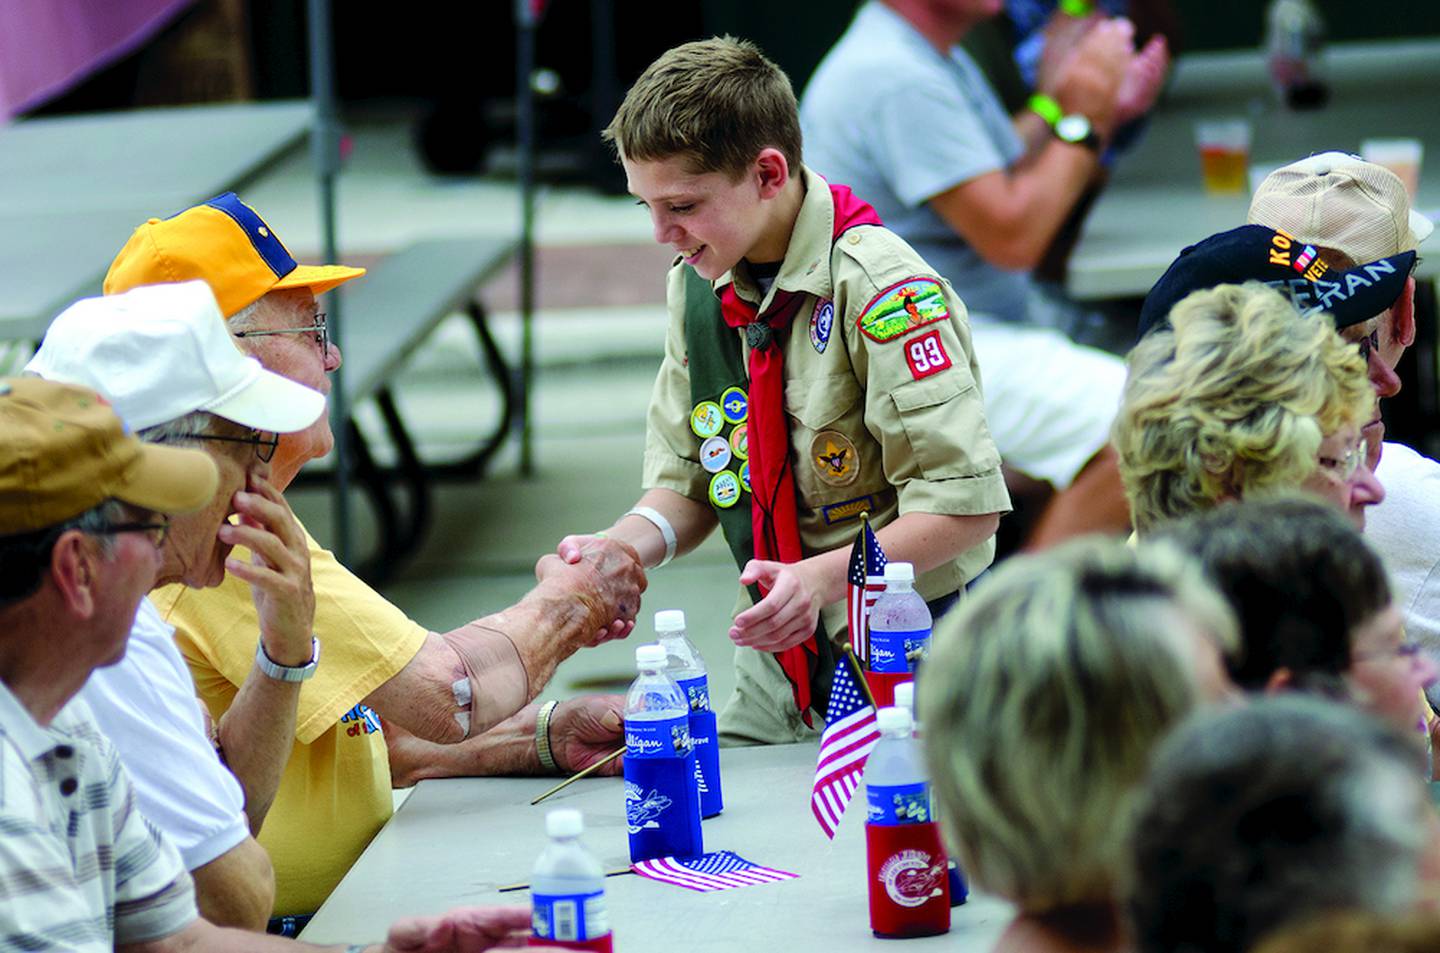 Boy Scout Noah Hage, 12, of Troop 93 was one of several scouts to make his way through the crowd shaking hands and thanking veterans for their service.